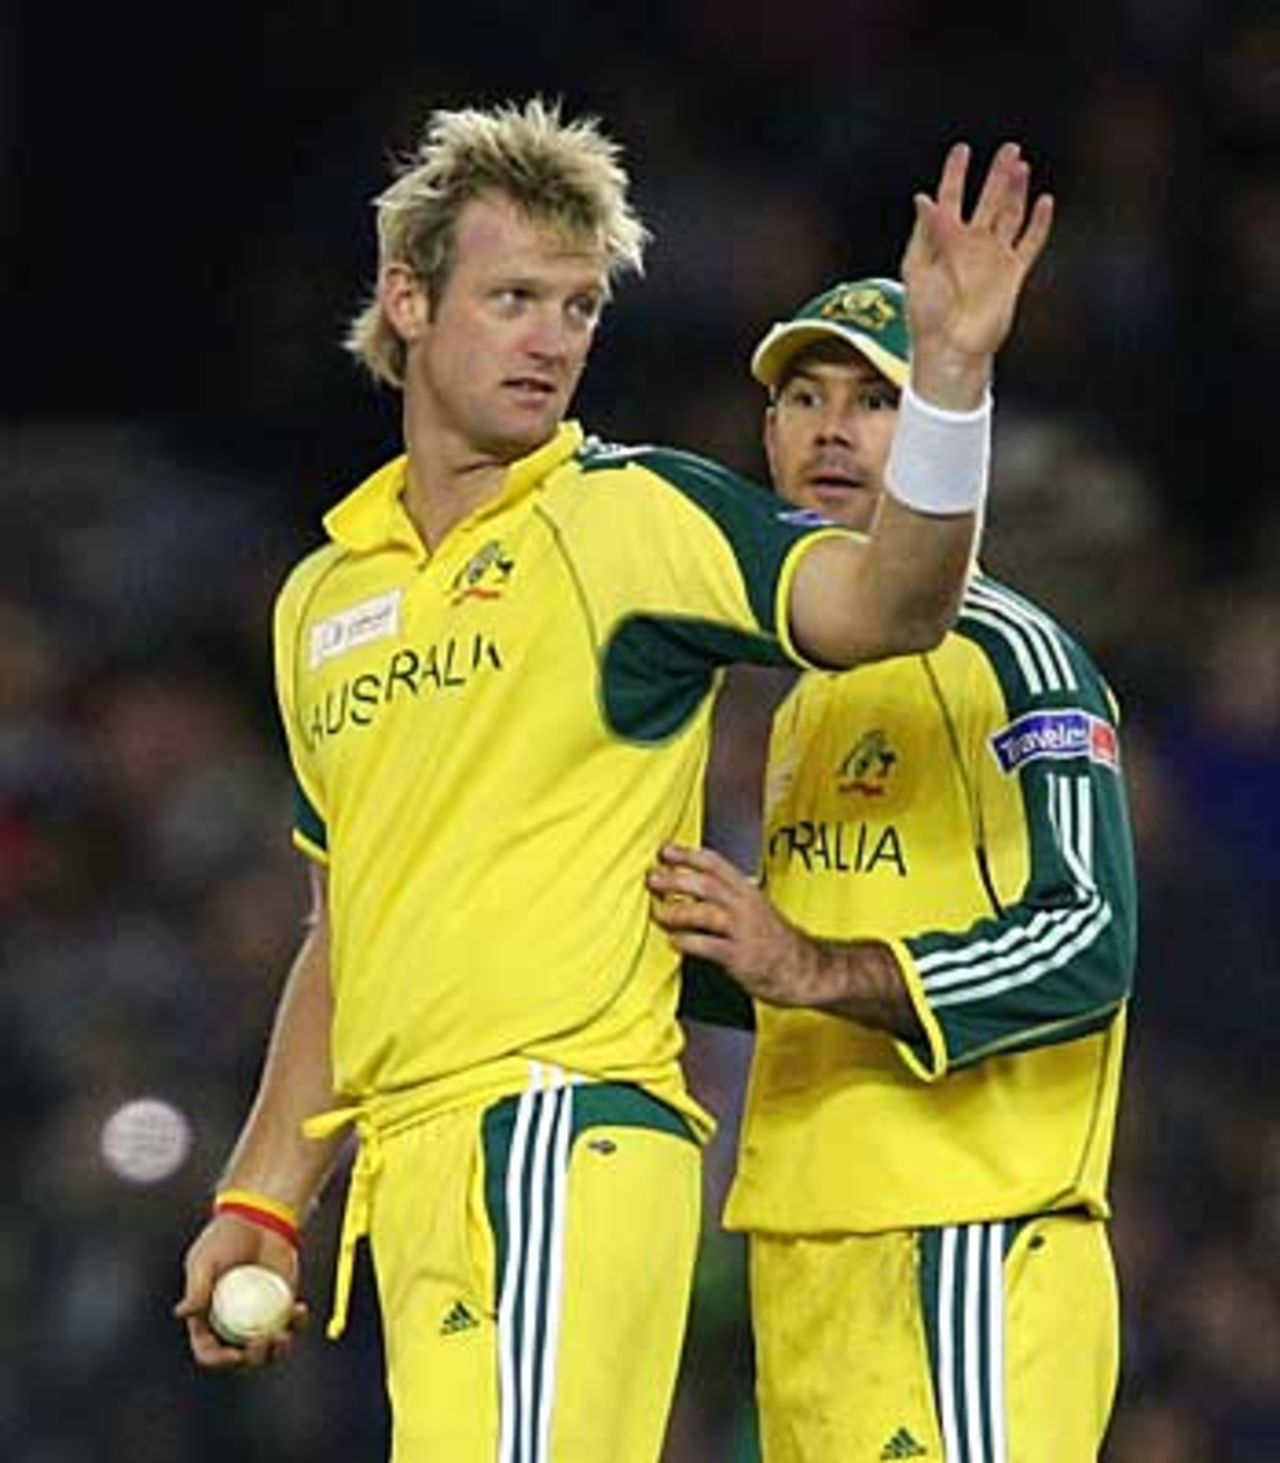 Cameron White and Ricky Ponting discuss what field to set, his first international wicket, Australia v World XI, 2nd ODI, Super Series, Melbourne, October 7, 2005